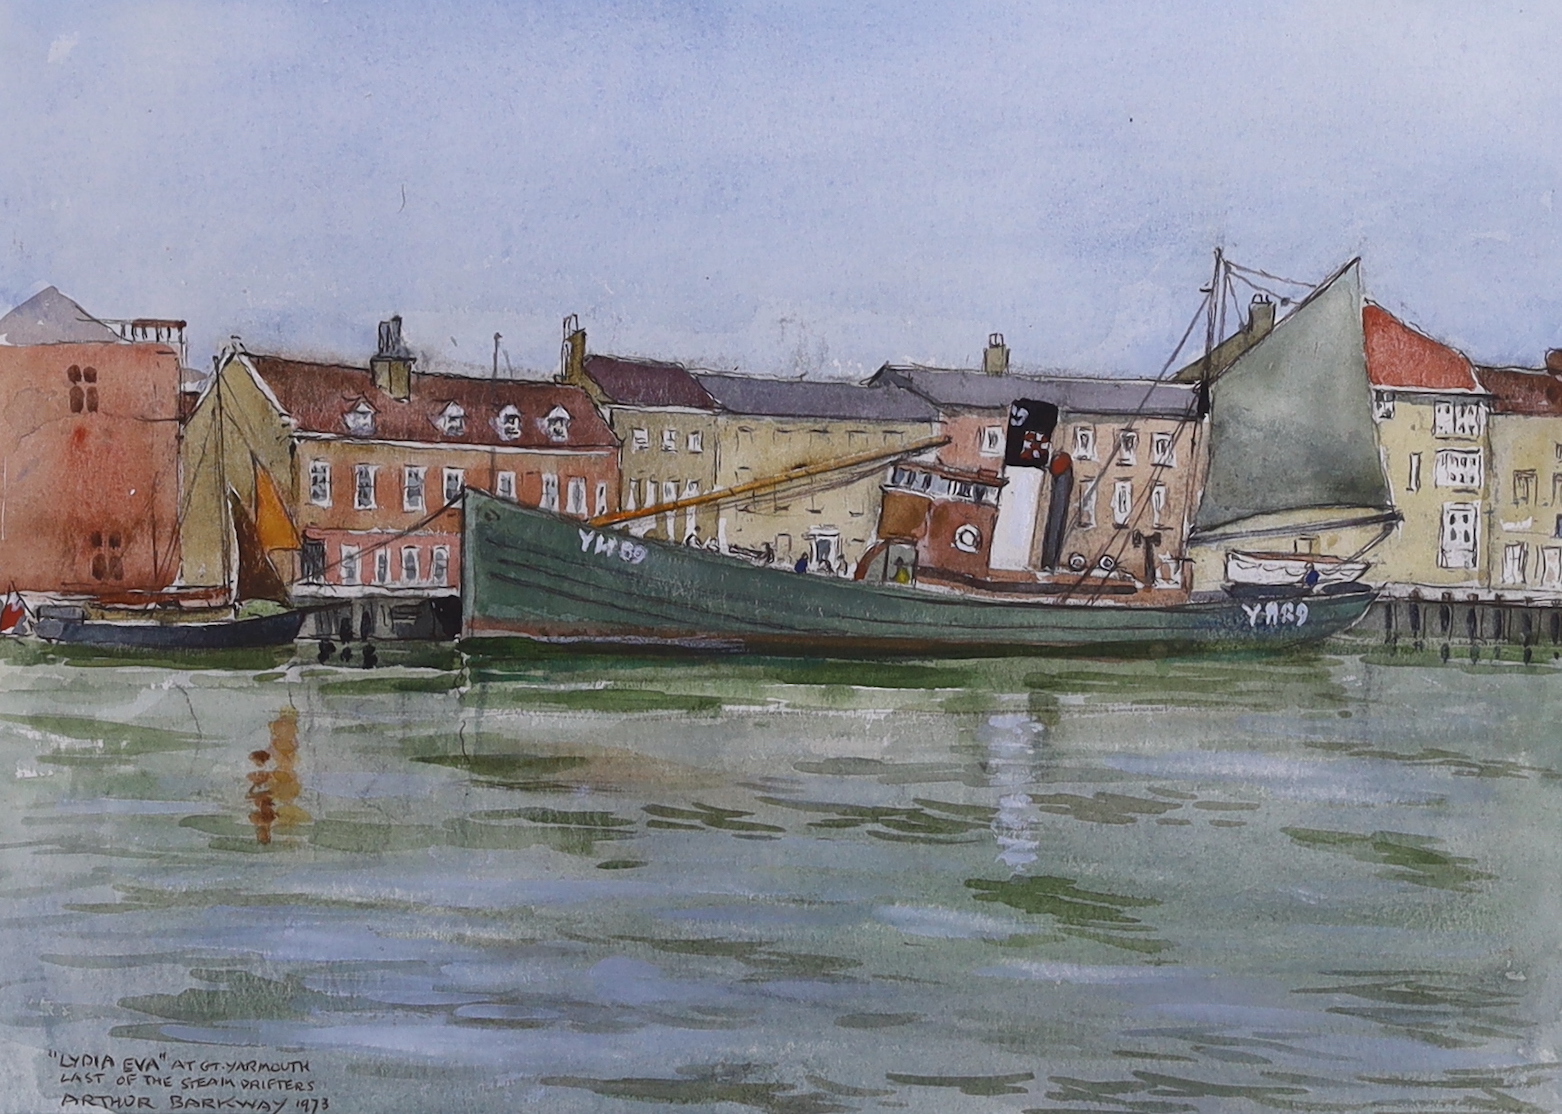 Arthur Barkway (1893-1979) watercolour, 'Lydia Eva YH89', the last of the steam drifters, inscribed, signed and dated 1973, 34 x 24cm